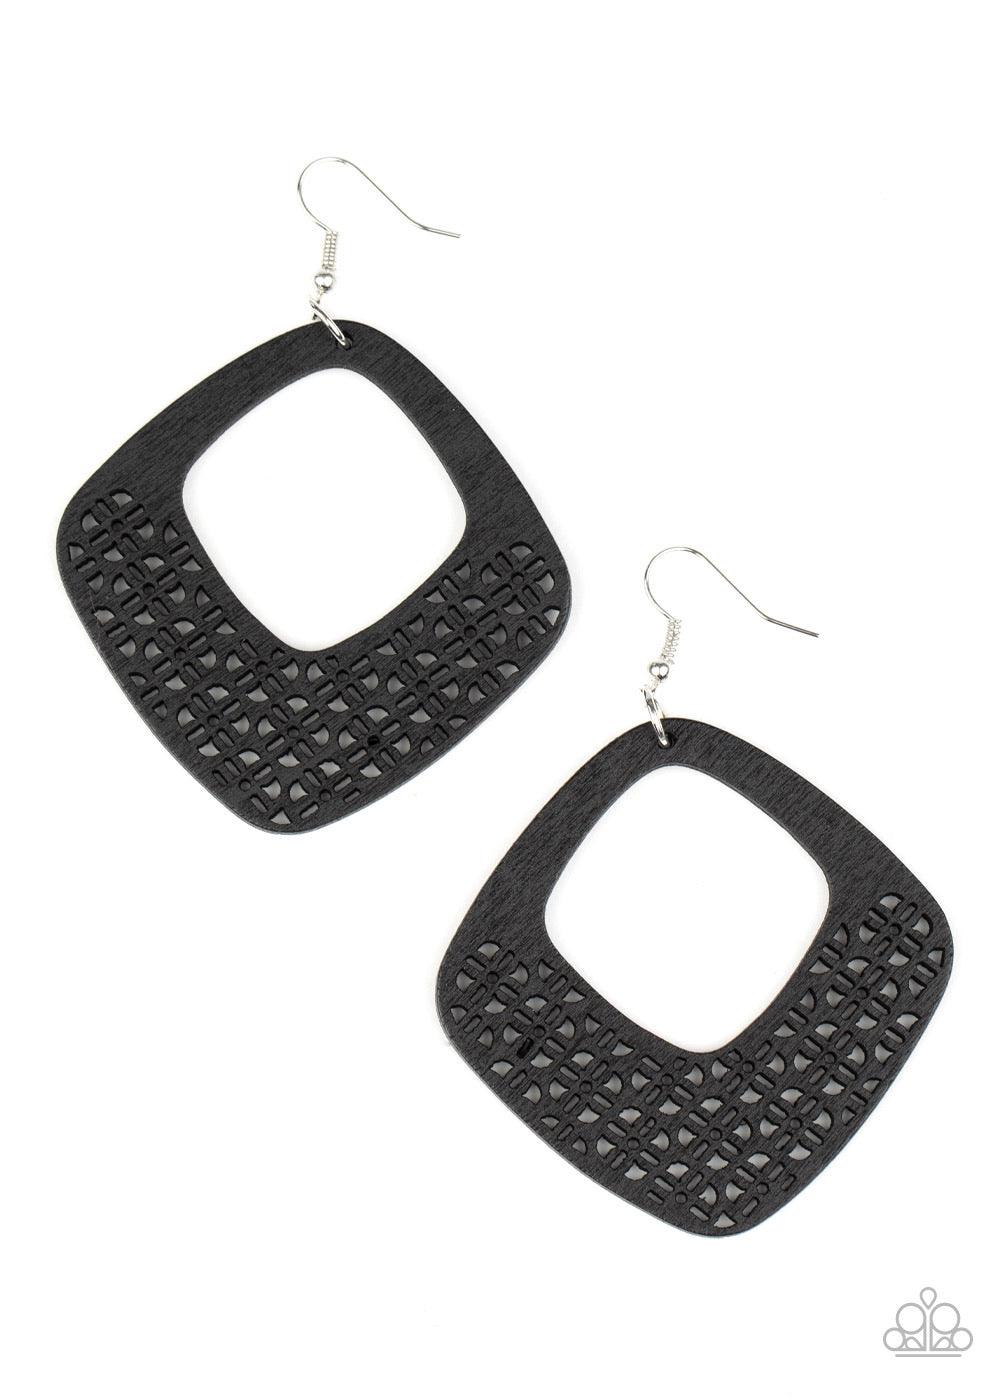 Paparazzi Accessories Wood You Rather - Black Painted in a neutral black finish, the bottom of a wooden diamond-shaped frame has been cut into an airy floral stenciled pattern for a whimsical finish. Earring attaches to a standard fishhook fitting. Sold a